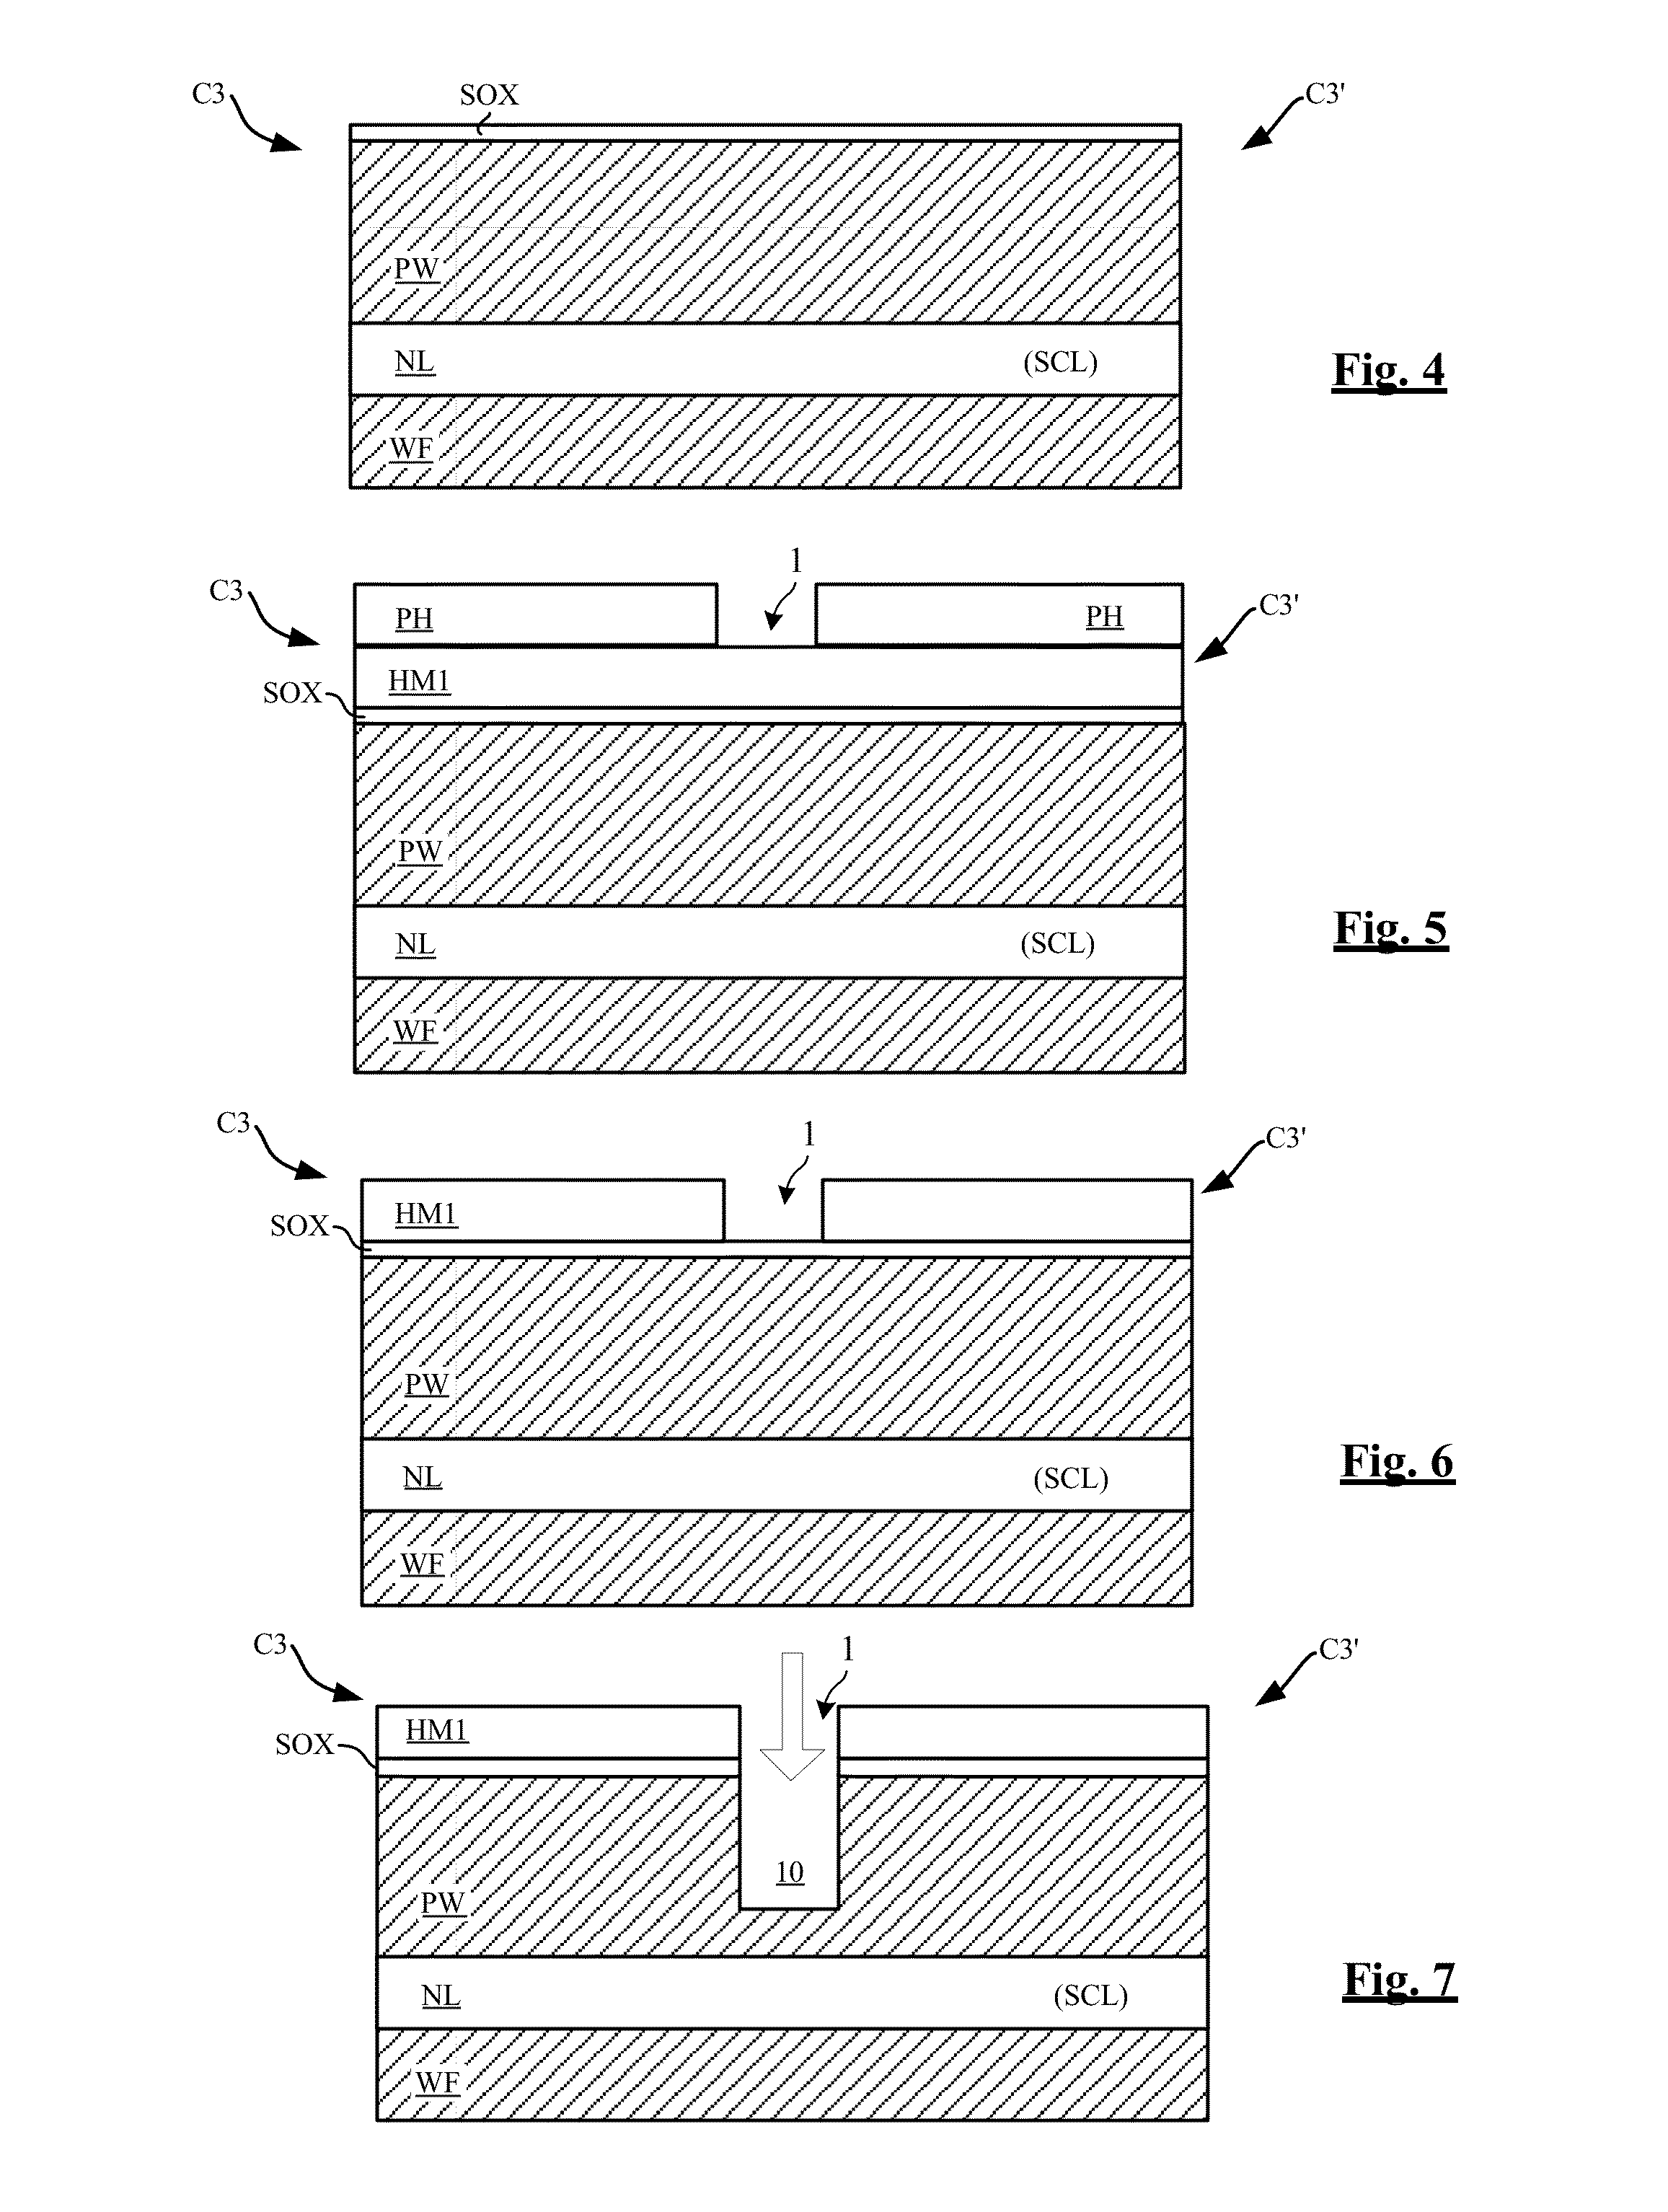 Memory cell comprising non-self-aligned horizontal and vertical control gates